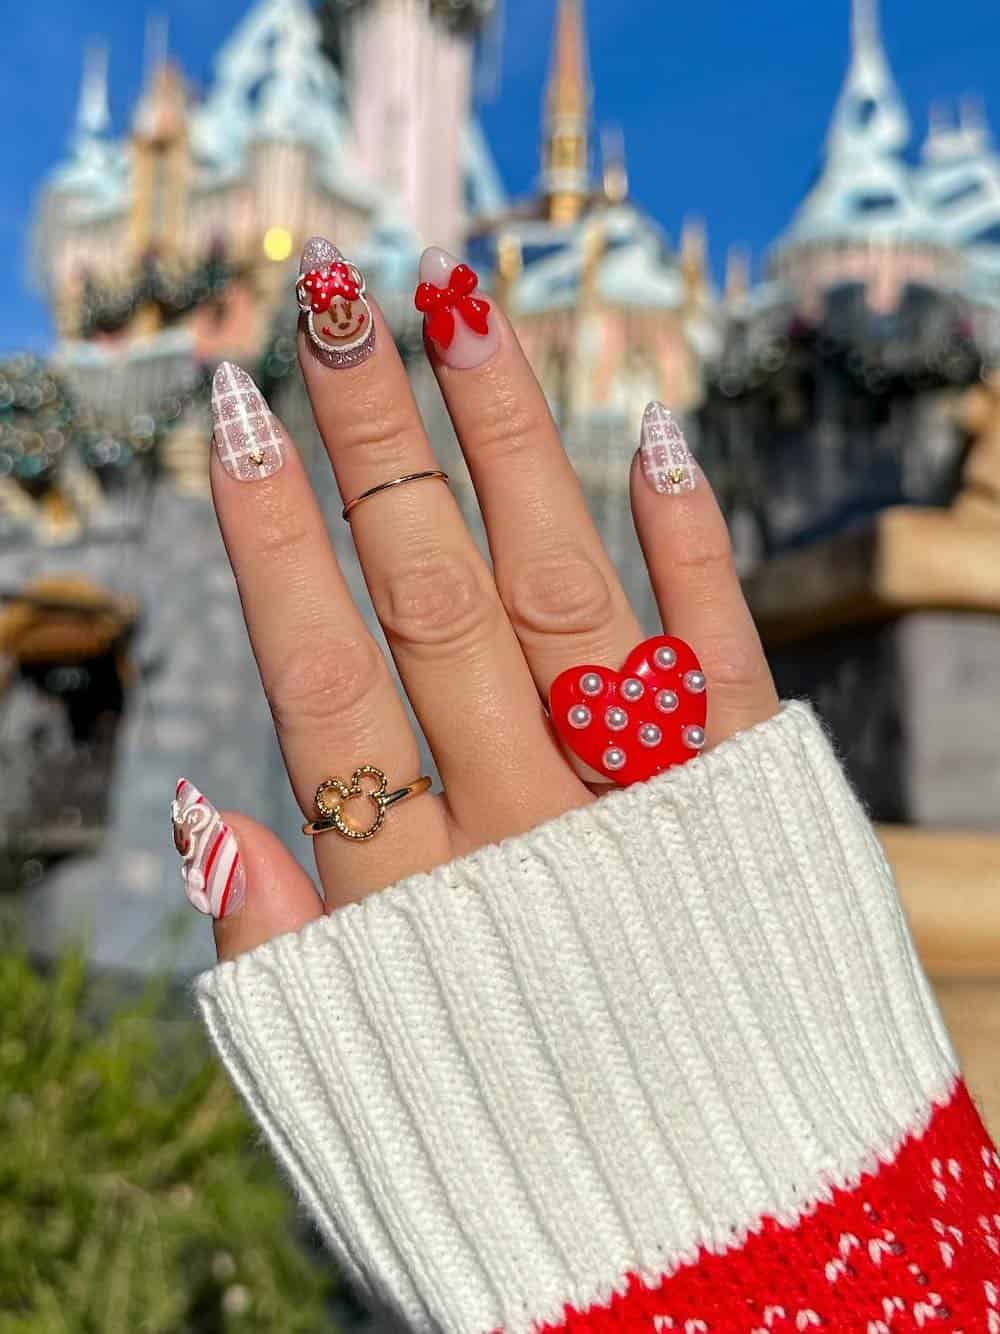 Medium almond nails with a Christmas Mickey Mouse design featuring white nude, and red polish and gingerbread art